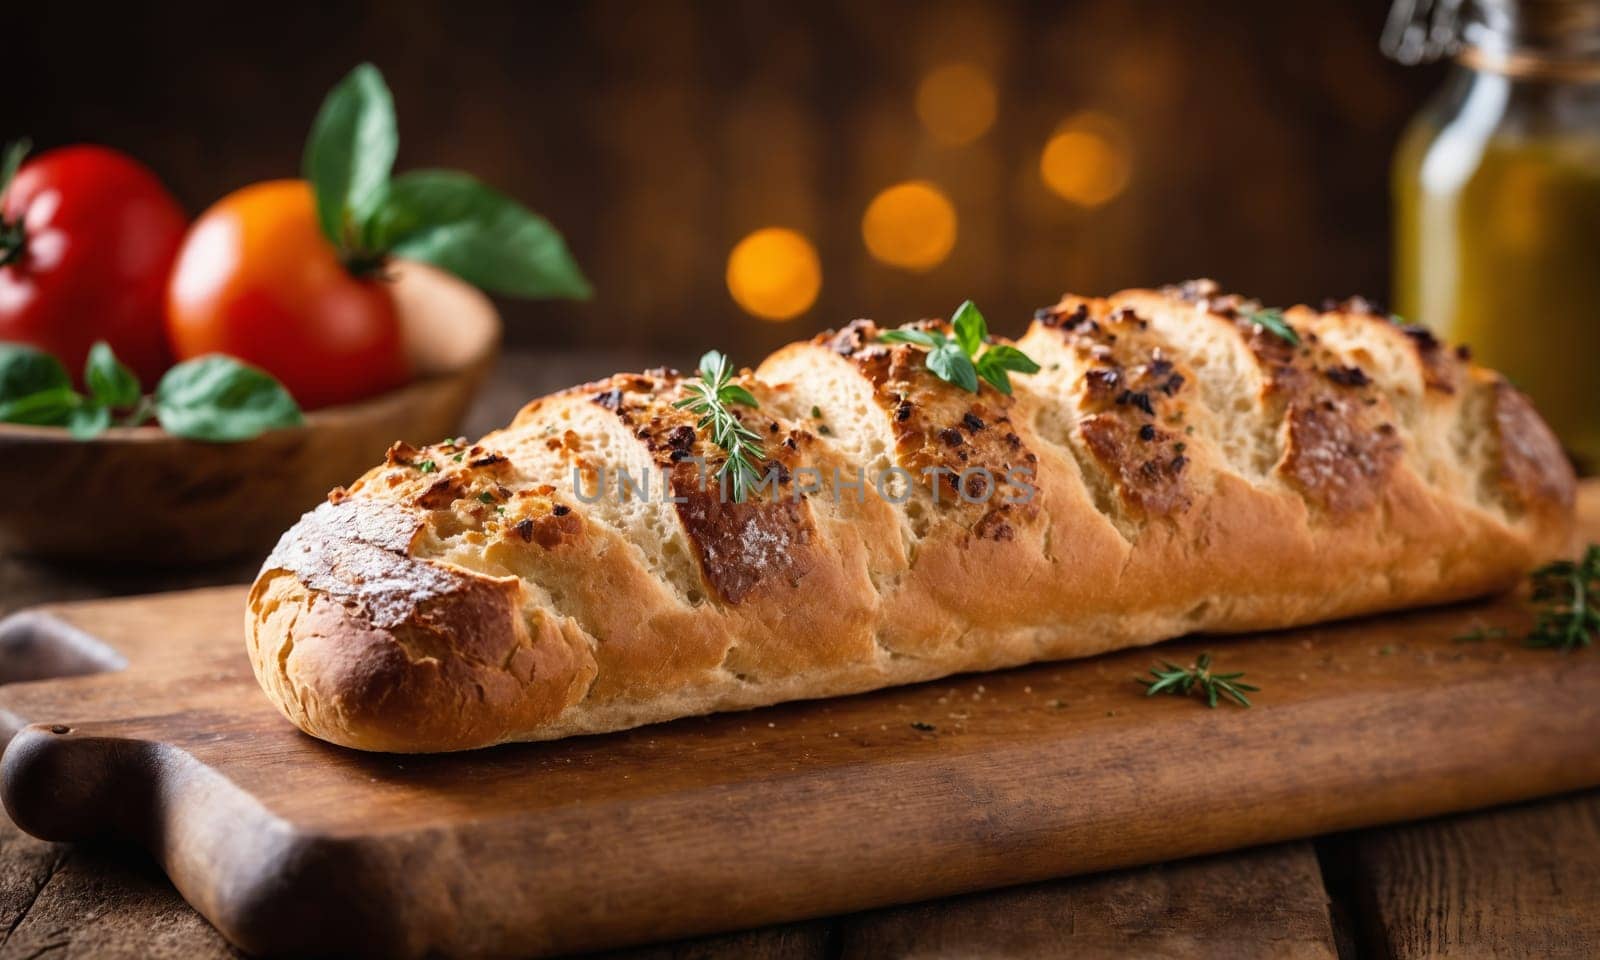 A staple food item, a loaf of bread is placed on a wooden cutting board. This food ingredient is essential in many recipes and is a popular baked goods item